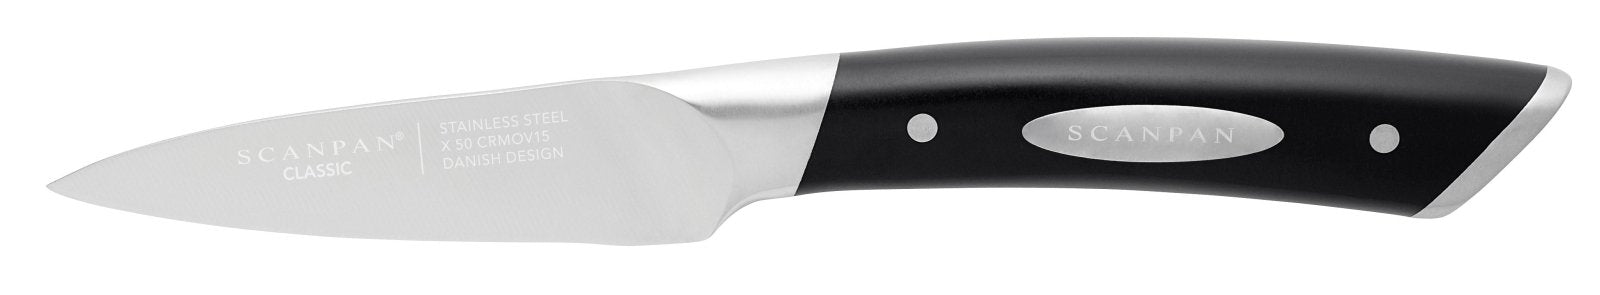 Scanpan Classic 9cm Paring Knife - SP92100900 - The Cotswold Knife Company